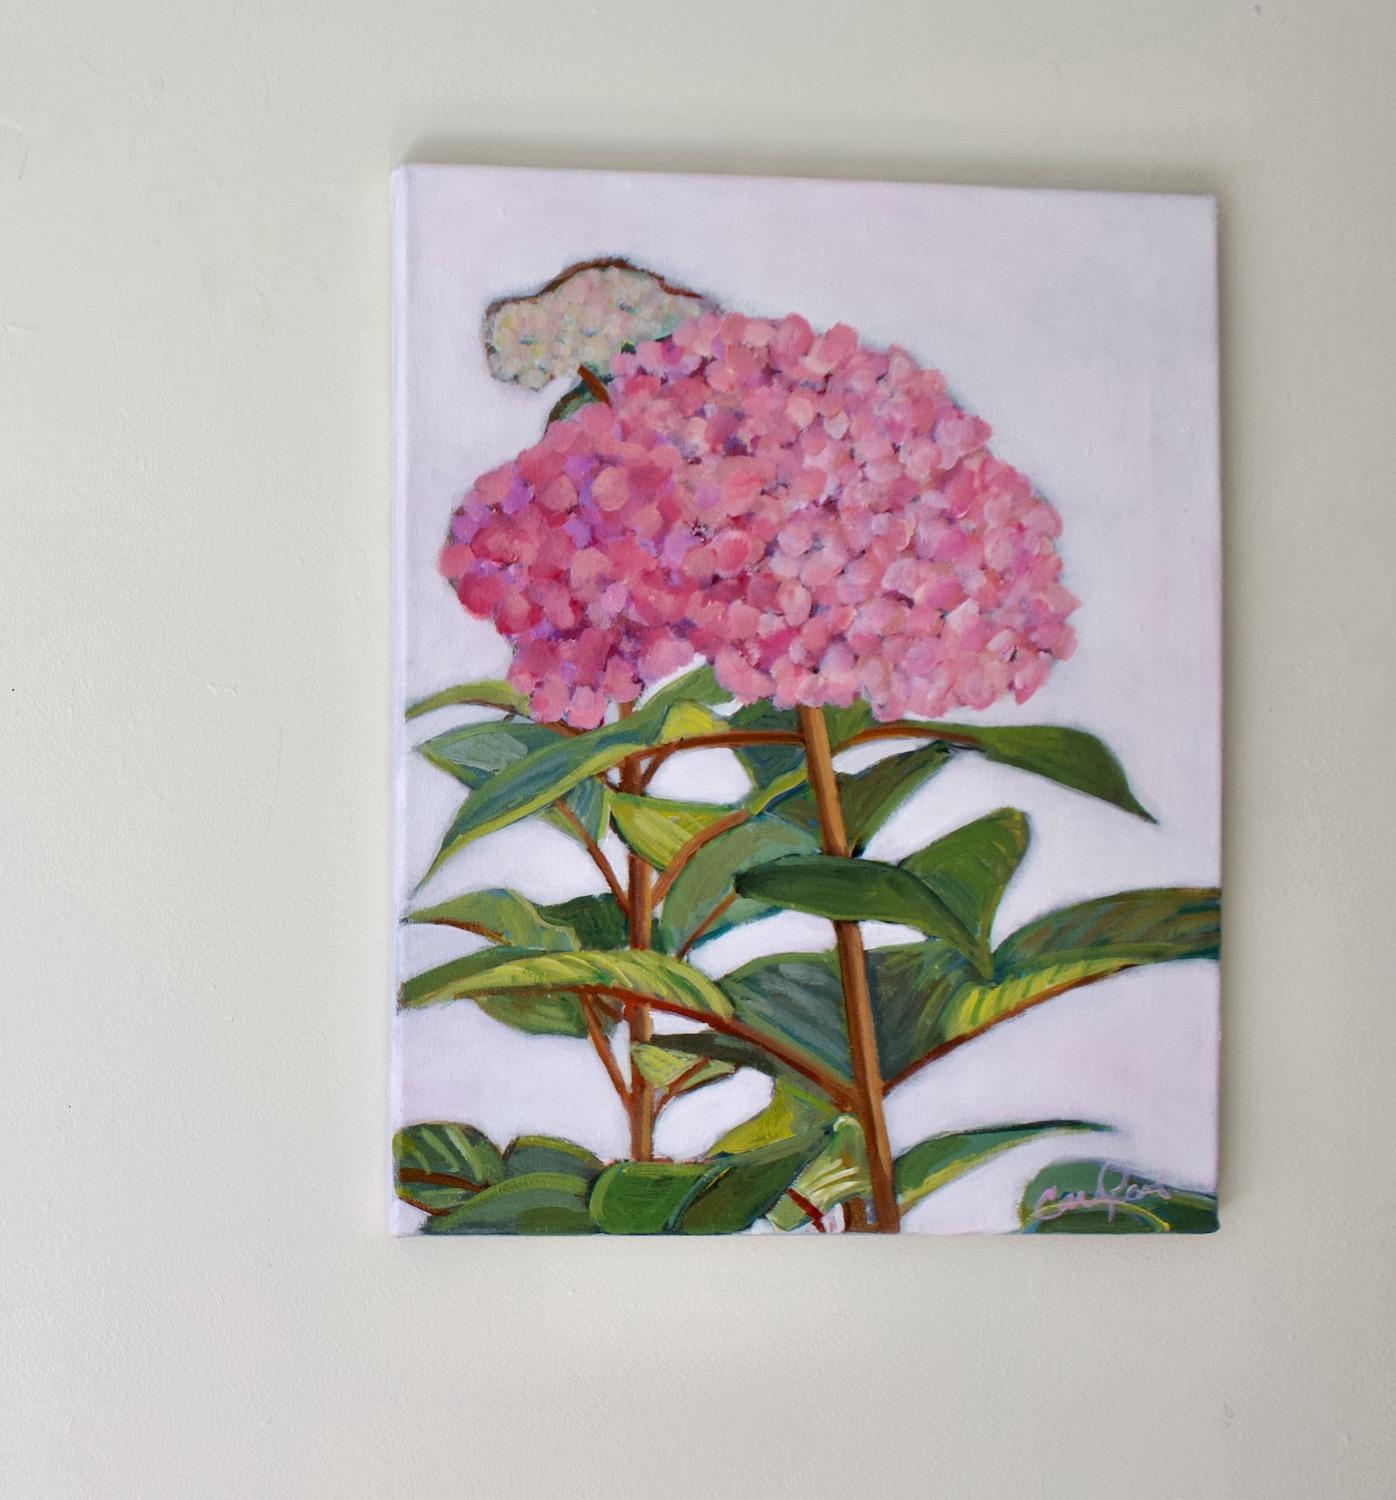 <p>Artist Comments<br>Artist Carey Parks portrays blooming hydrangeas from her garden. Set against a soft lilac background, the cluster of petals burst with rich pigments of magentas and pinks while the leaves shimmer with vibrant greens. The